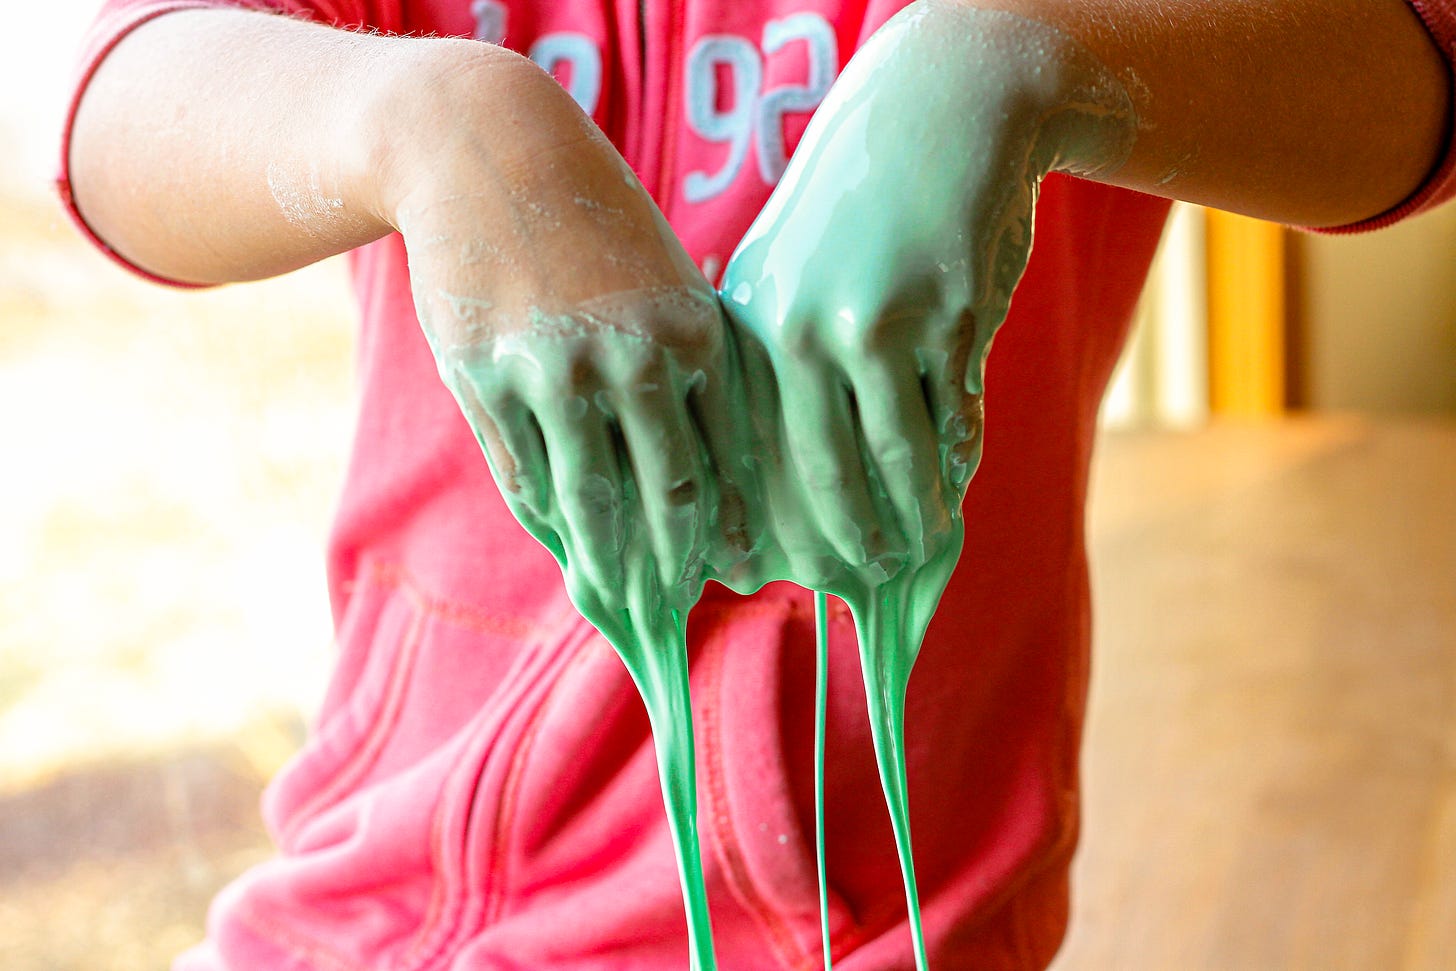 A green goo oozes off of a child's hands. Only the child's arms and torso in a red sweatshirt are visible.